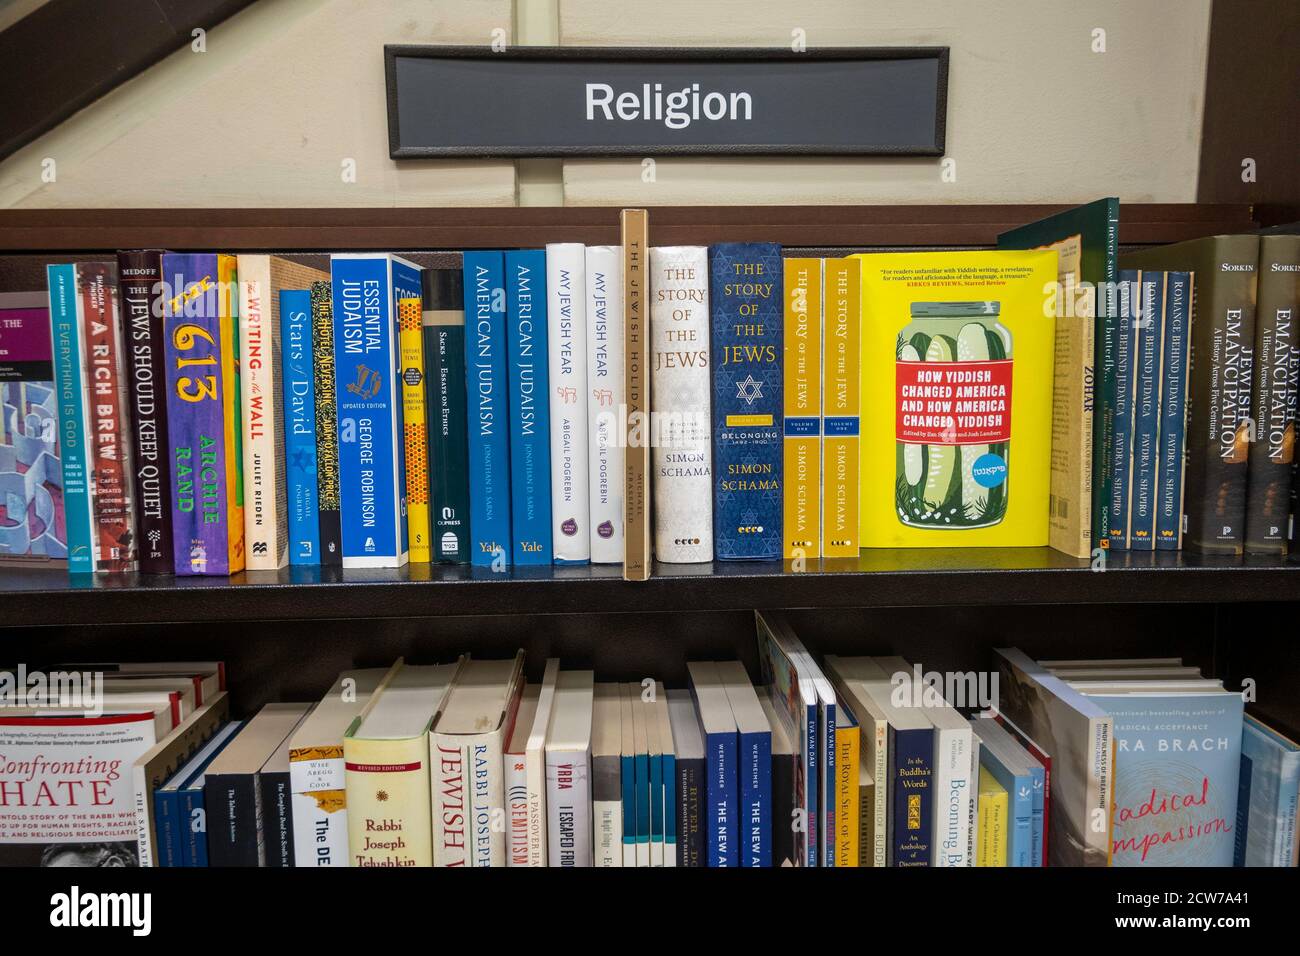 Barnes & Noble Booksellers Book Display of Religion Books, NYC, USA Stock Photo